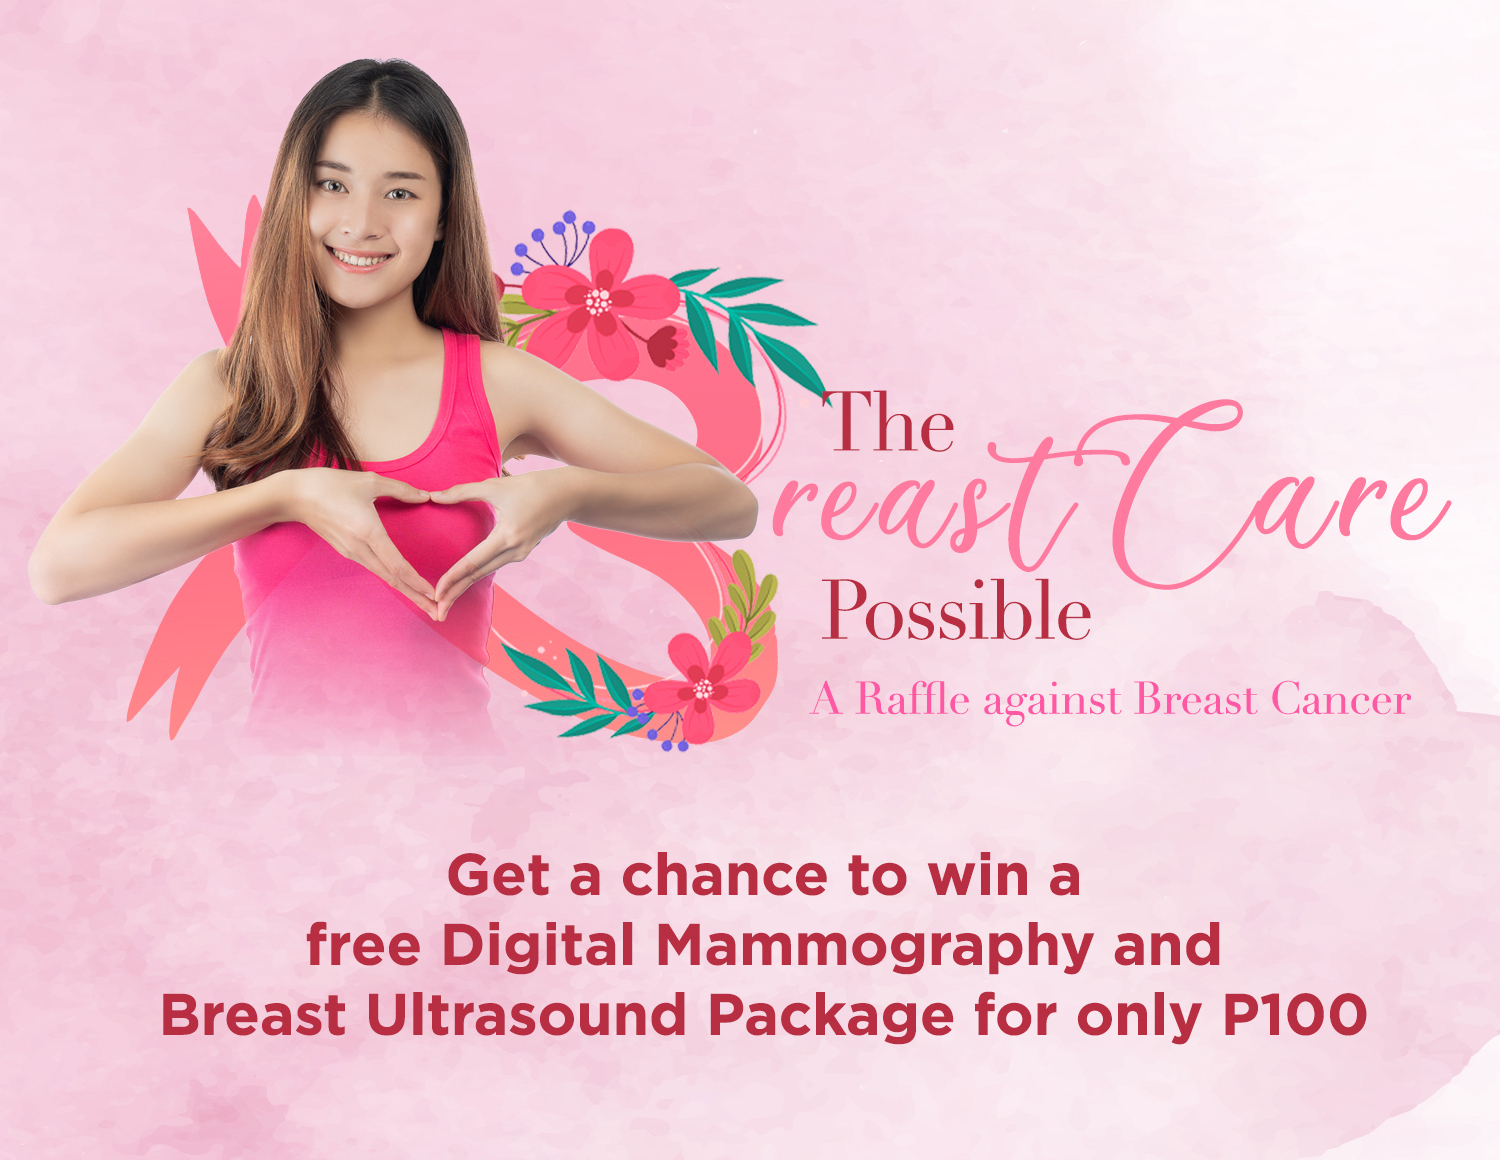 raffle program for a free mammography